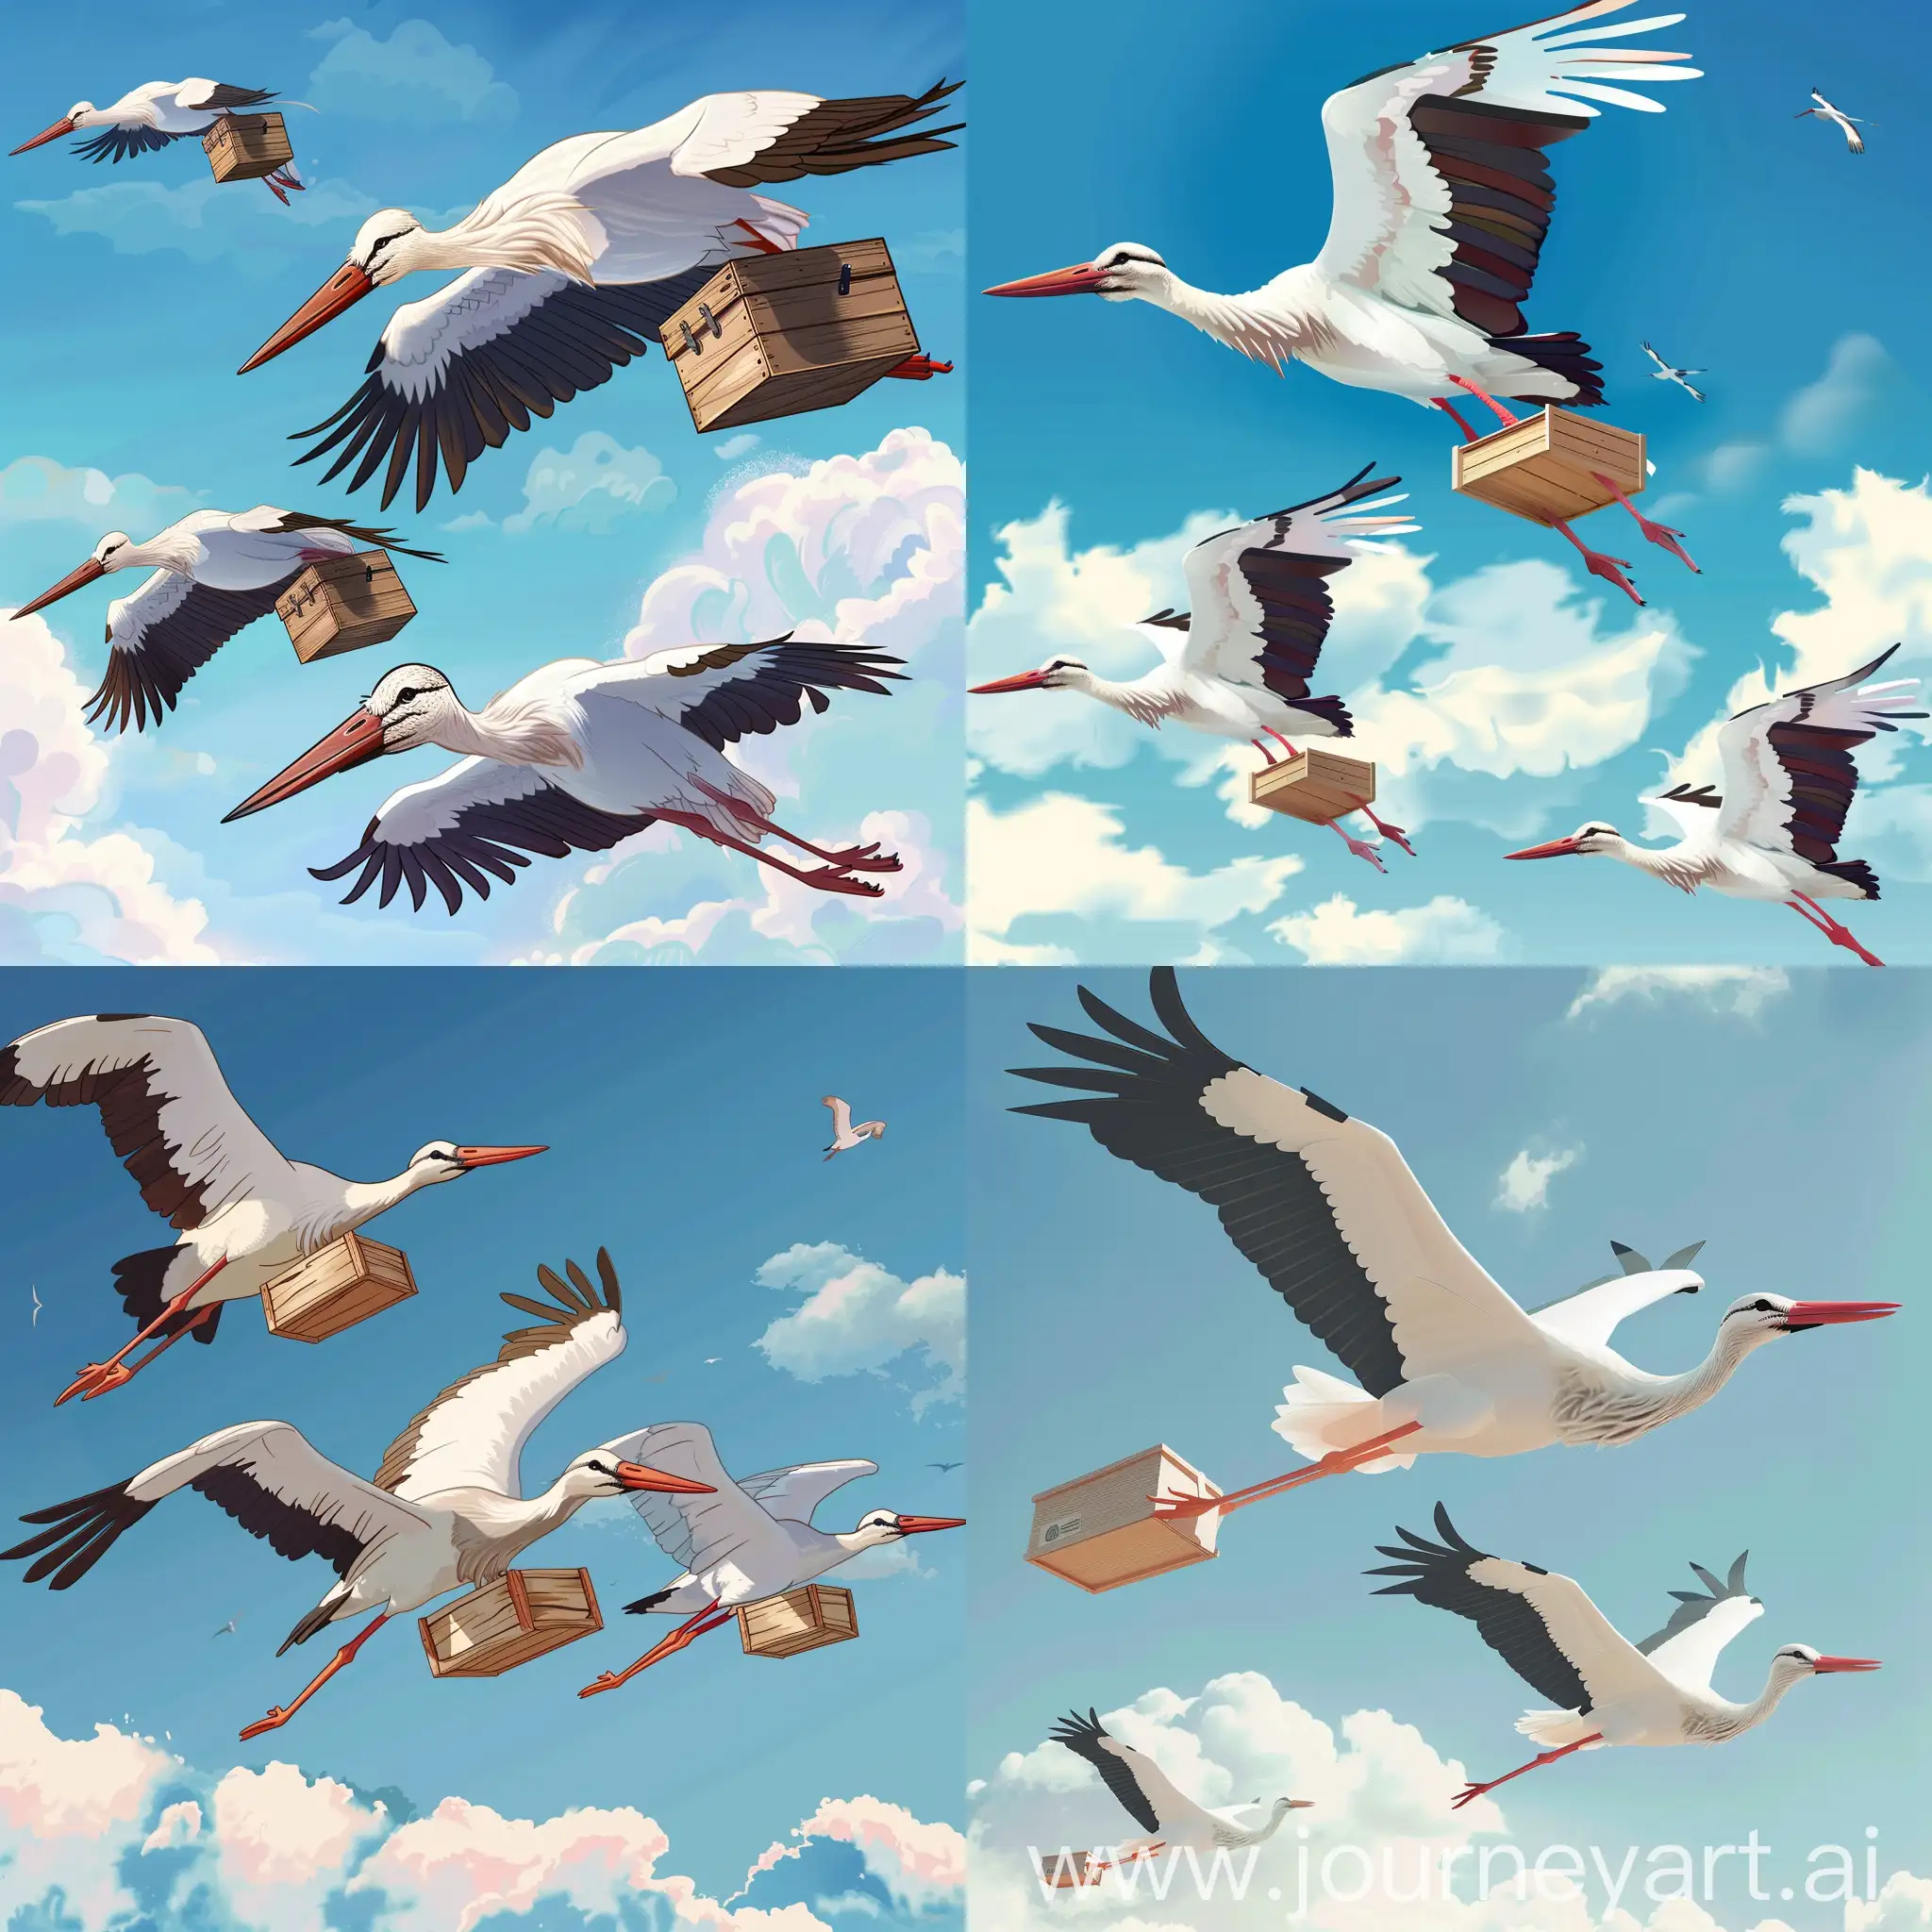 Three-Flying-Storks-Carrying-Wooden-Boxes-in-the-Sky